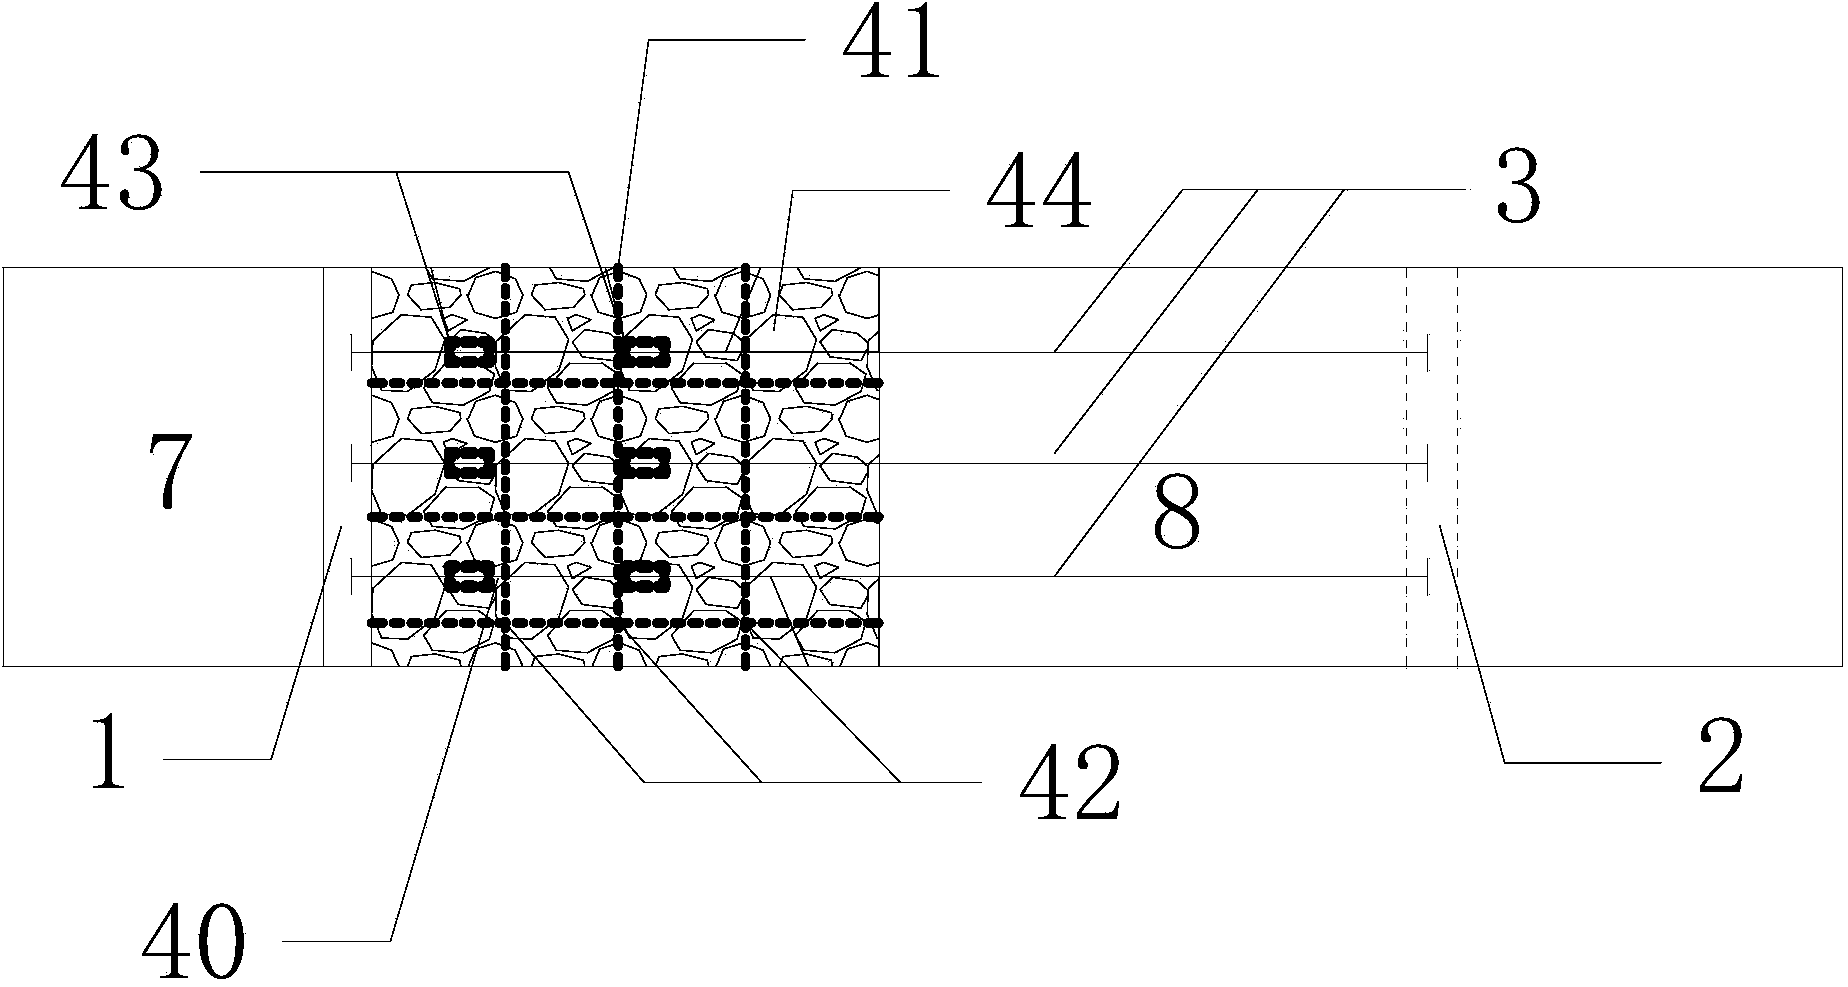 File foundation-flexile reinforcement cushion layer composite bearing table type sheet-pile structure